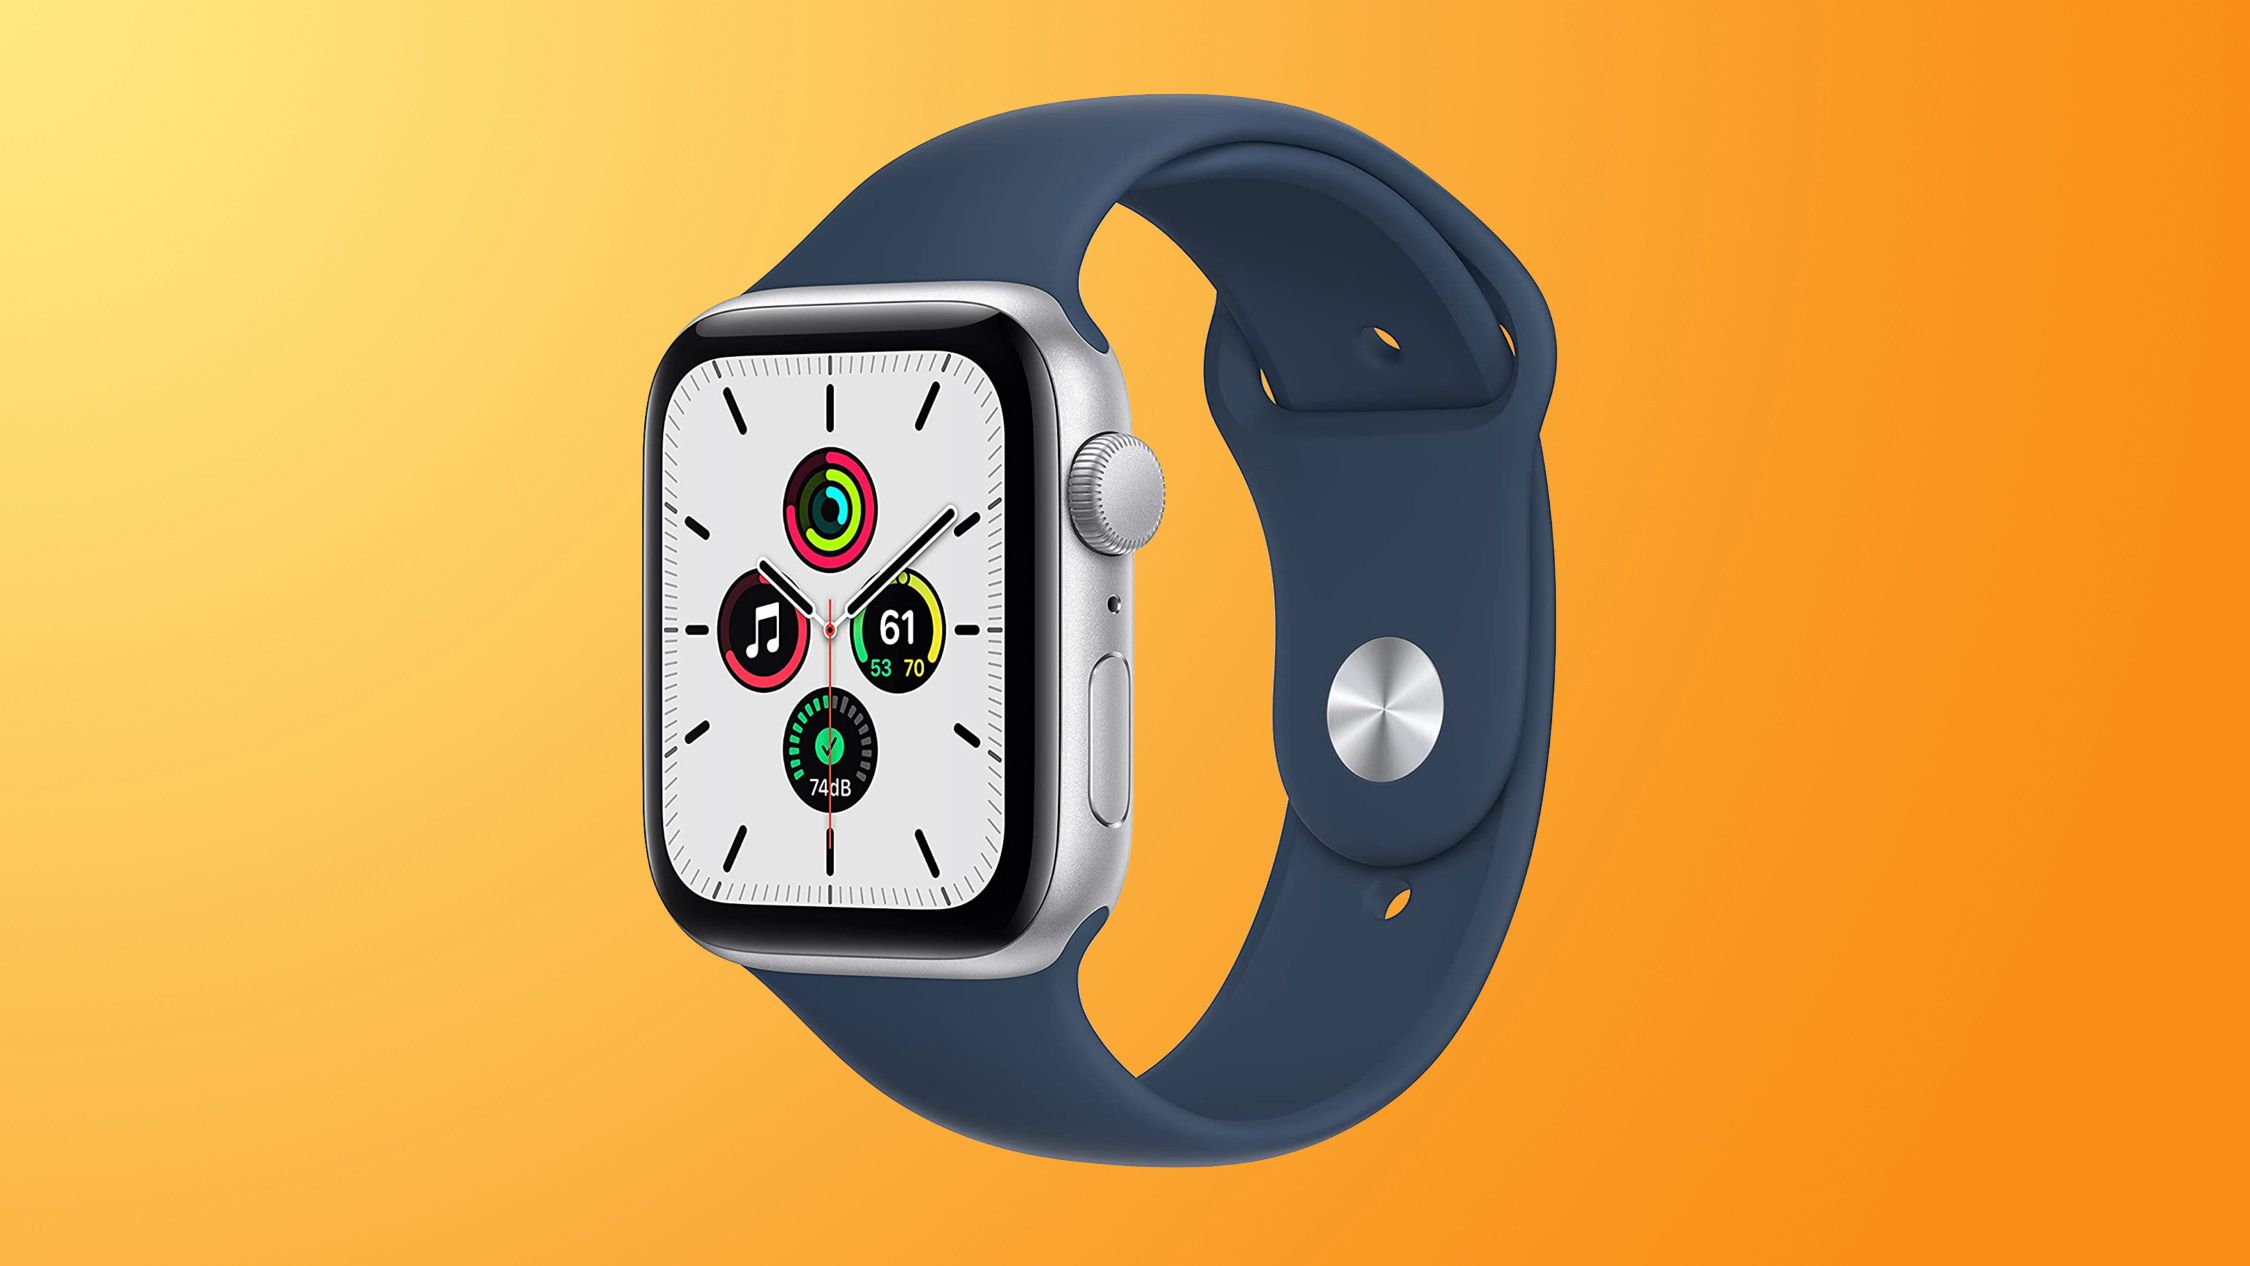 Deals: Amazon Takes Up to $99 Off Apple Watch SE Models